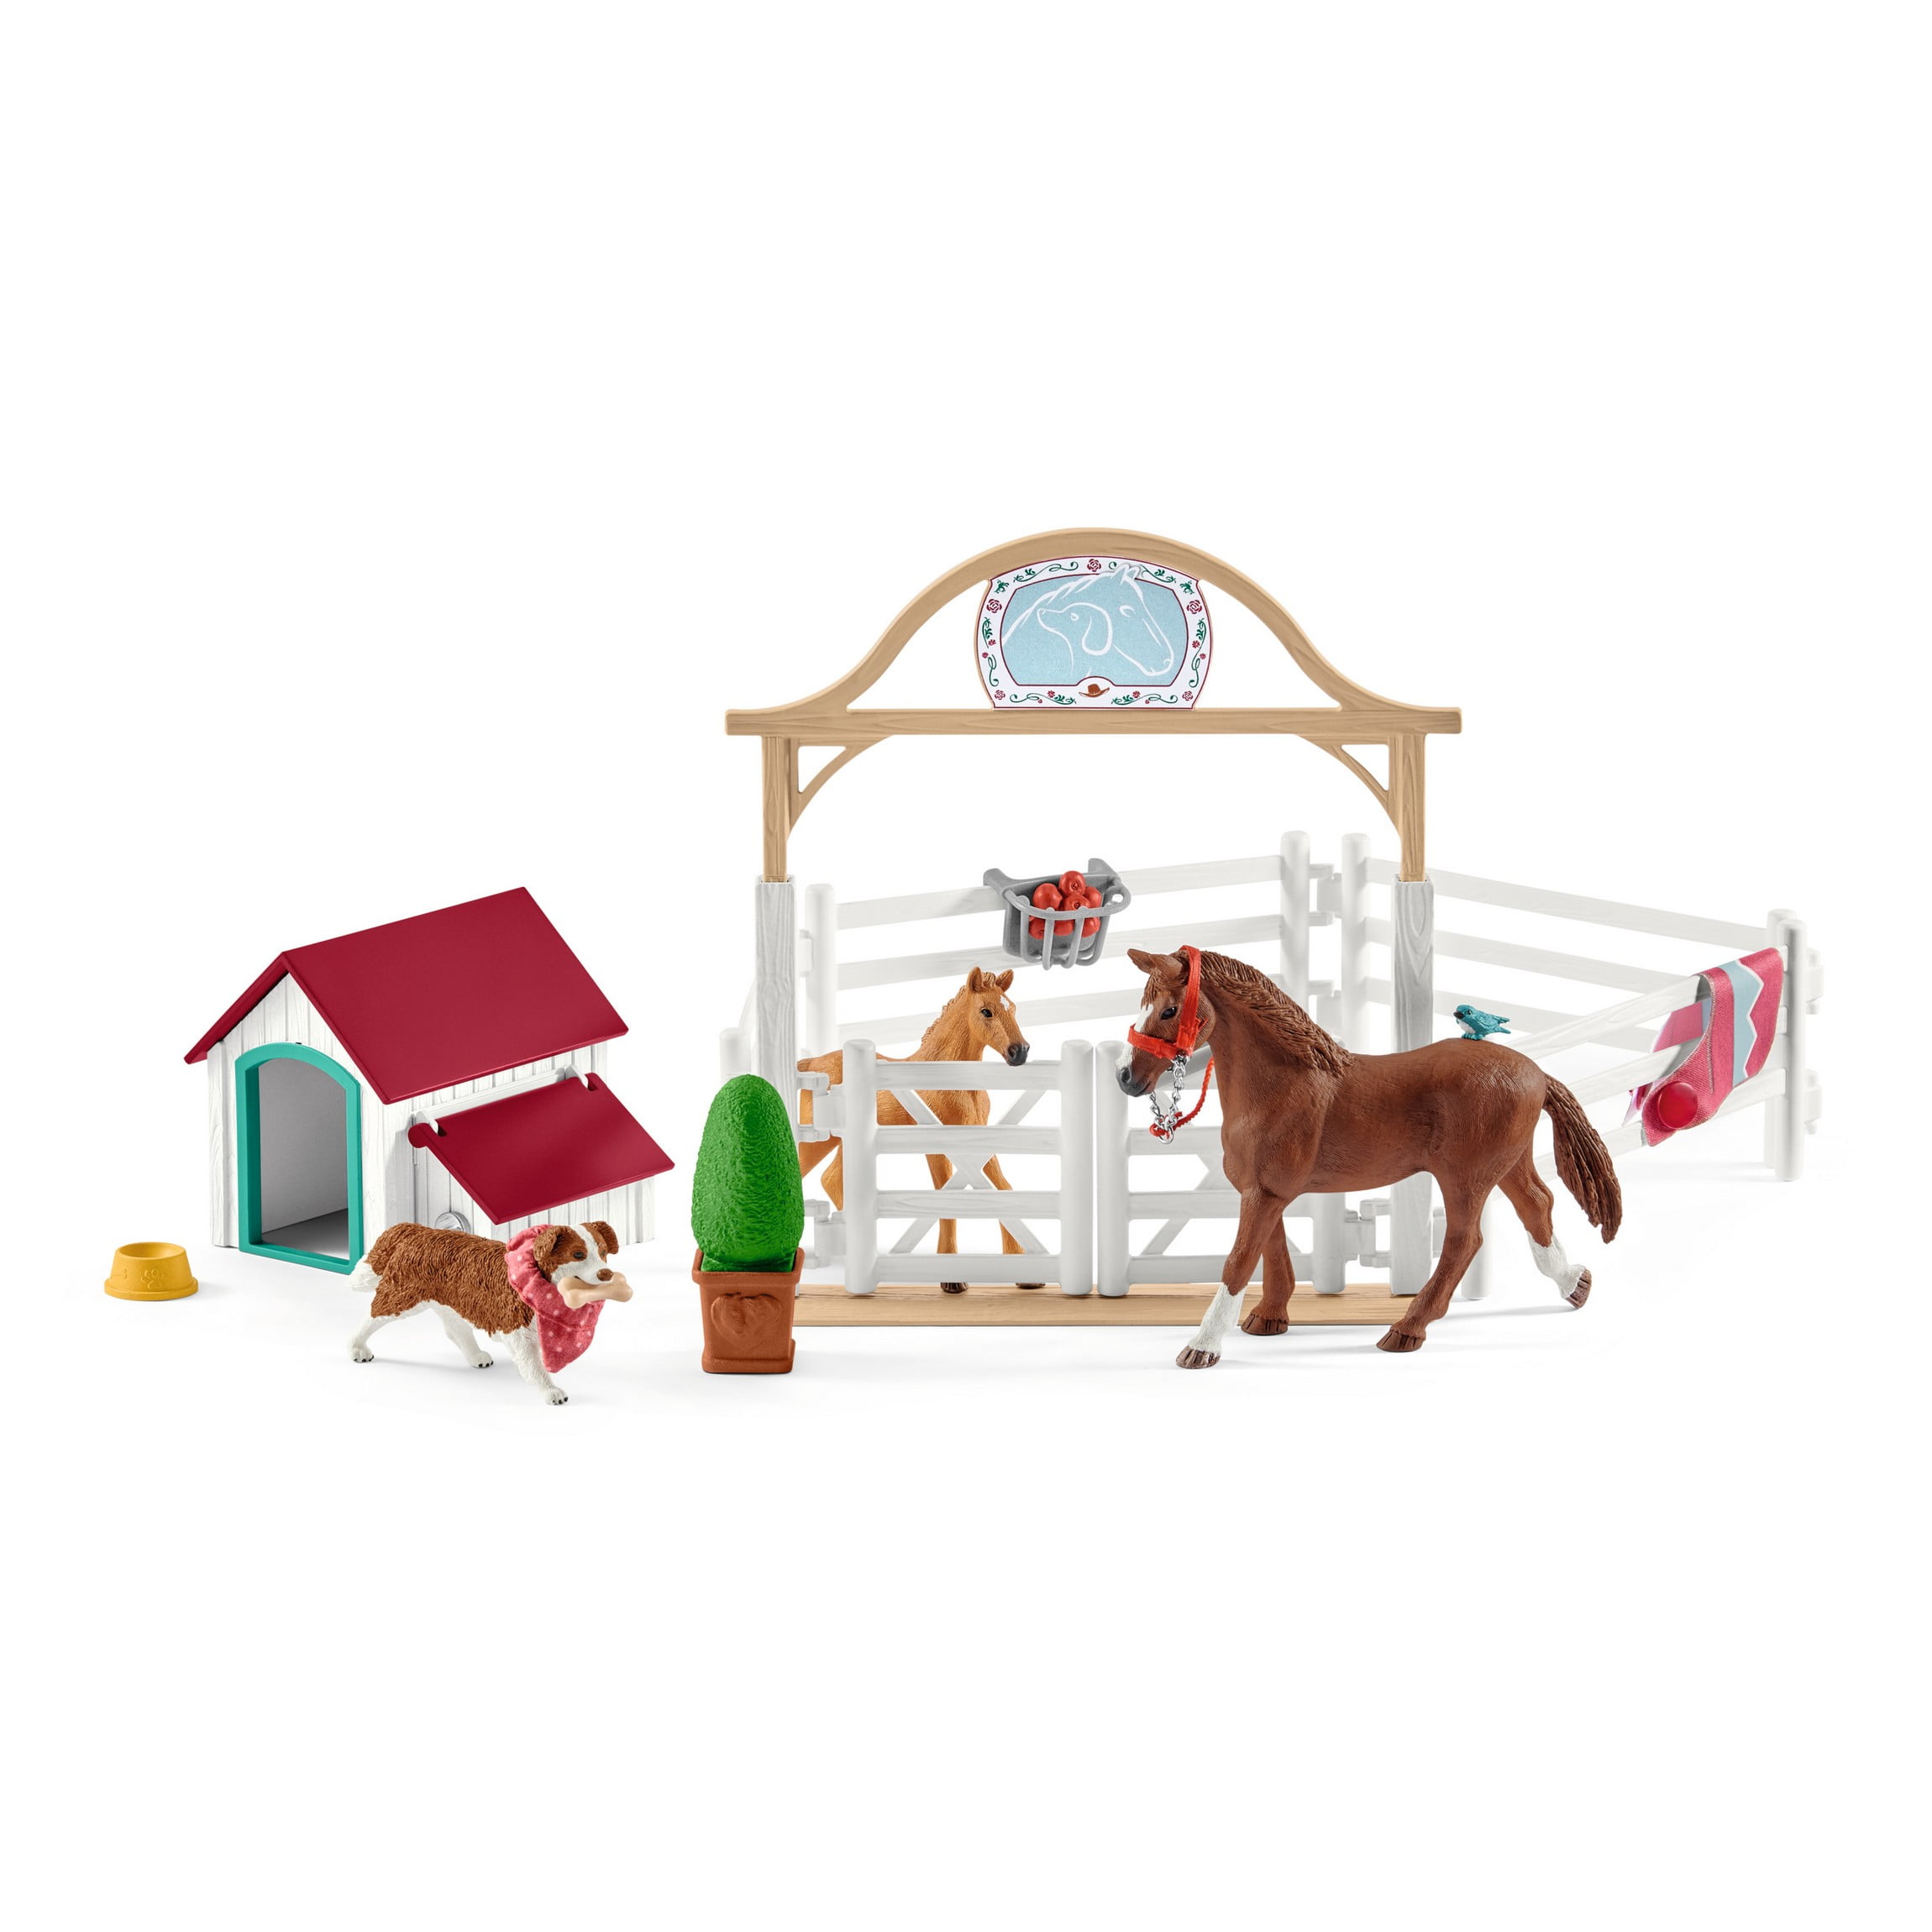 Schleich horse club rider café set with figures and accessories rrp £52.99 